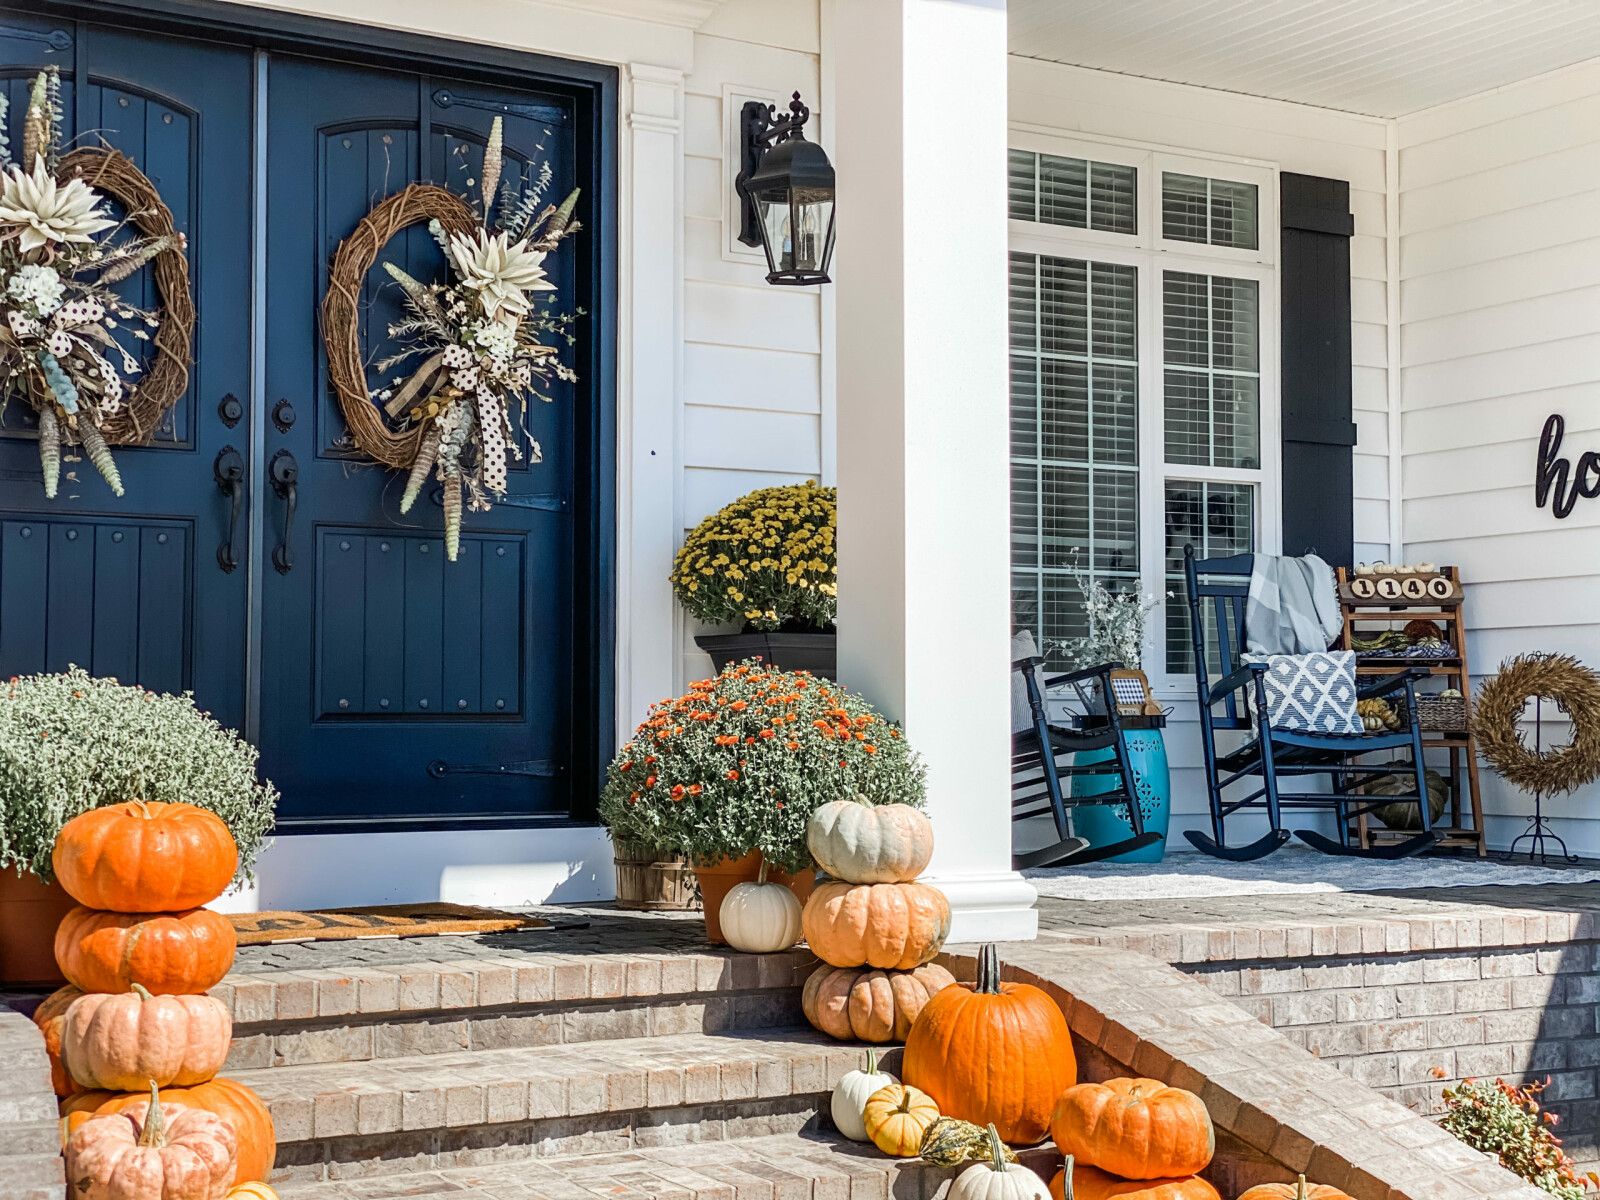 5 Simple Steps to the Perfect Fall Porch